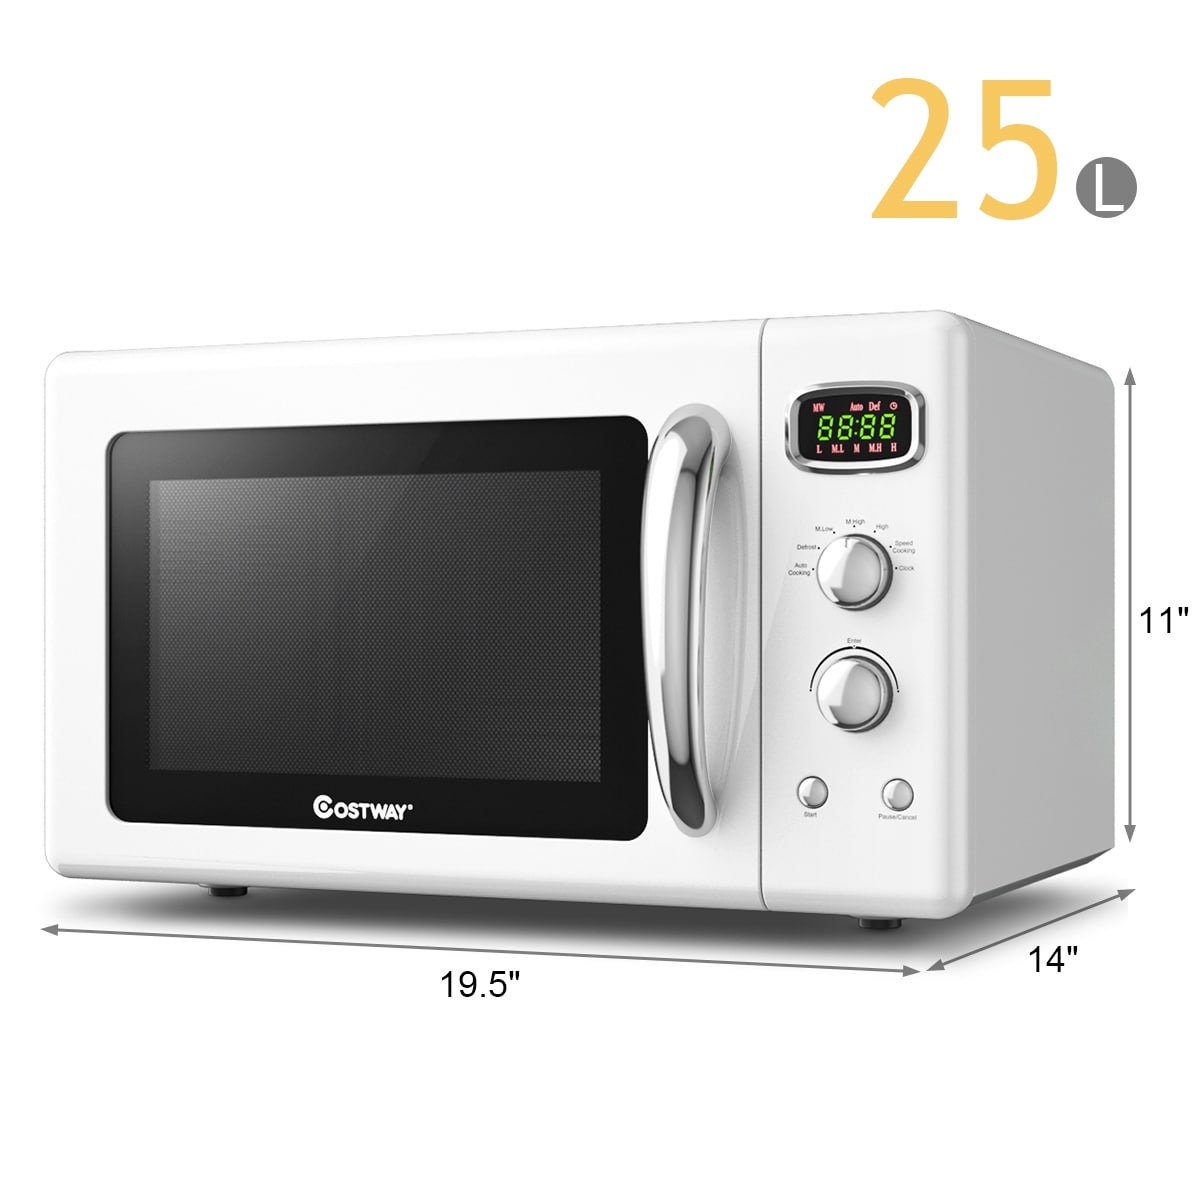 https://ak1.ostkcdn.com/images/products/is/images/direct/e46ca2a319fb3fd000fb0440b2cd8ebd15bc2234/Costway-0.9Cu.ft.-Retro-Countertop-Compact-Microwave-Oven-900W-8.jpg